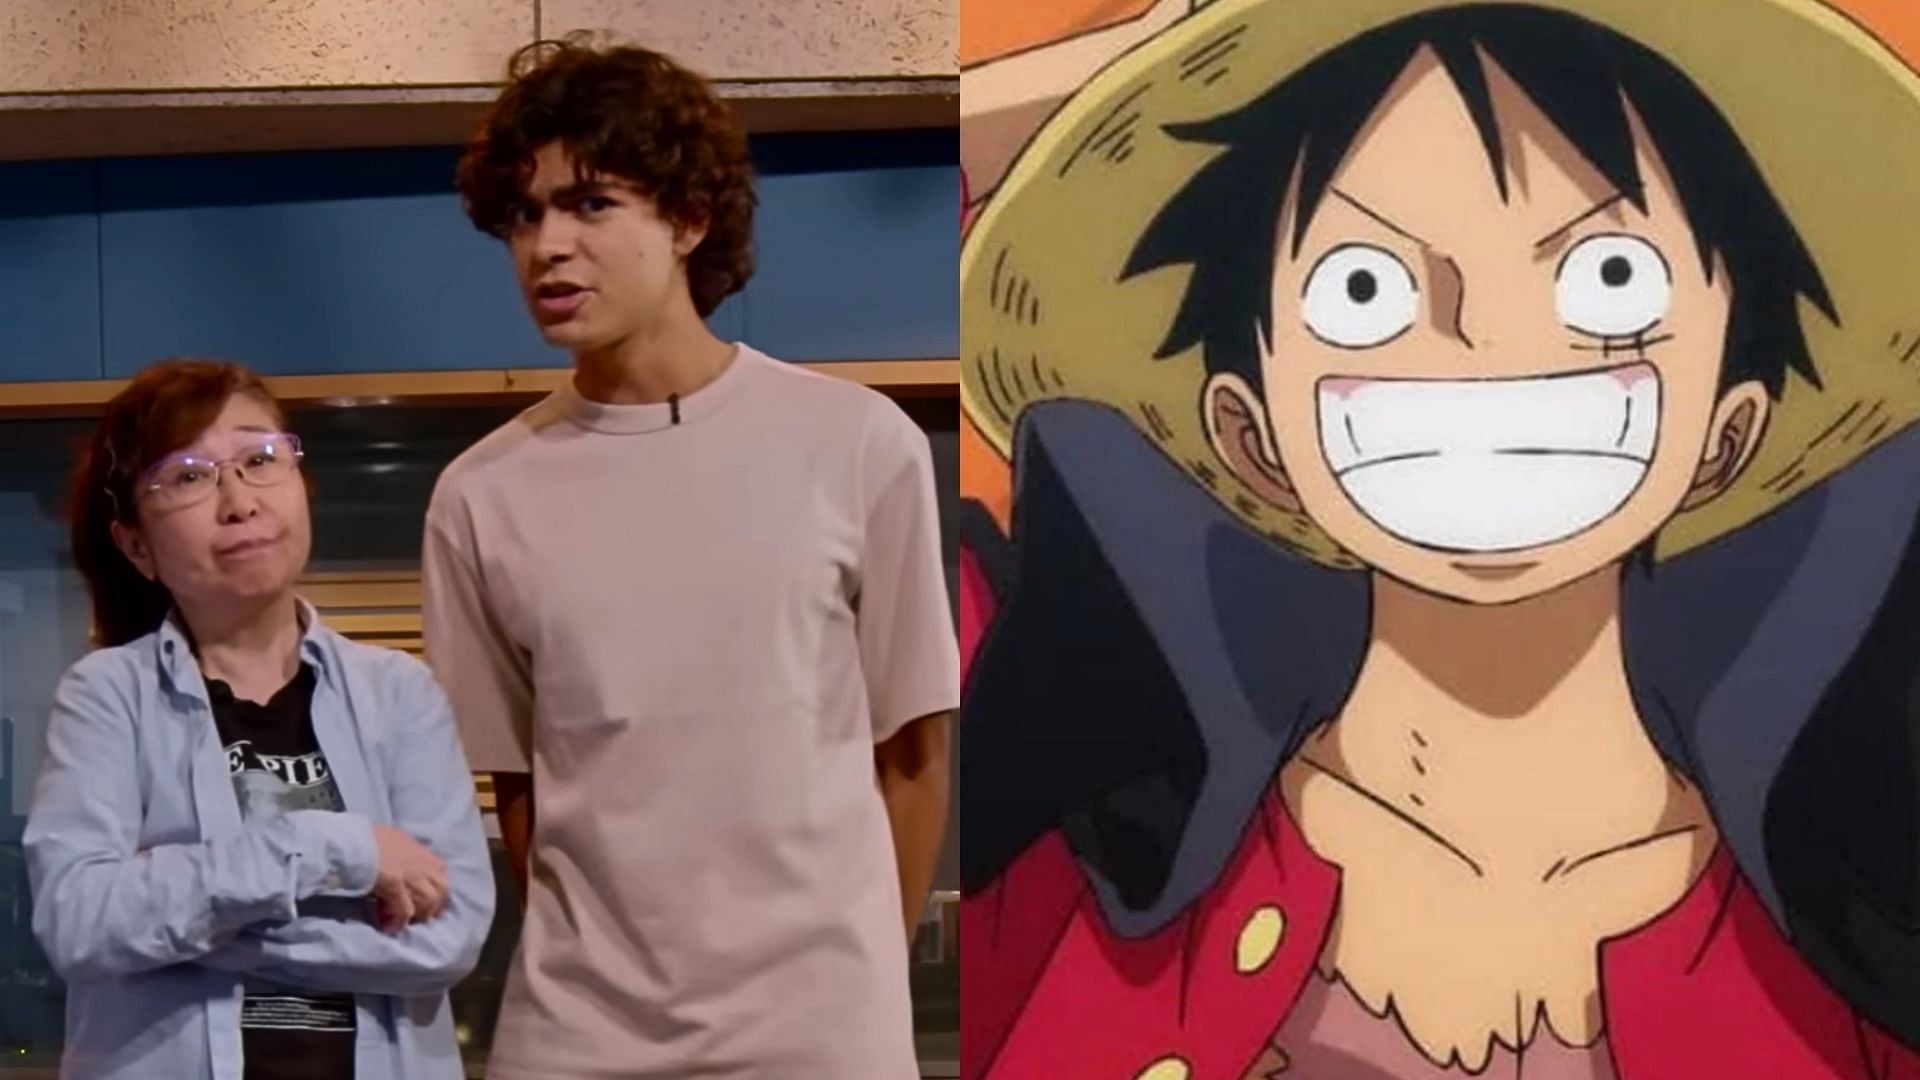 Netflix's “One Piece” Live Action Series: Meet the Characters and